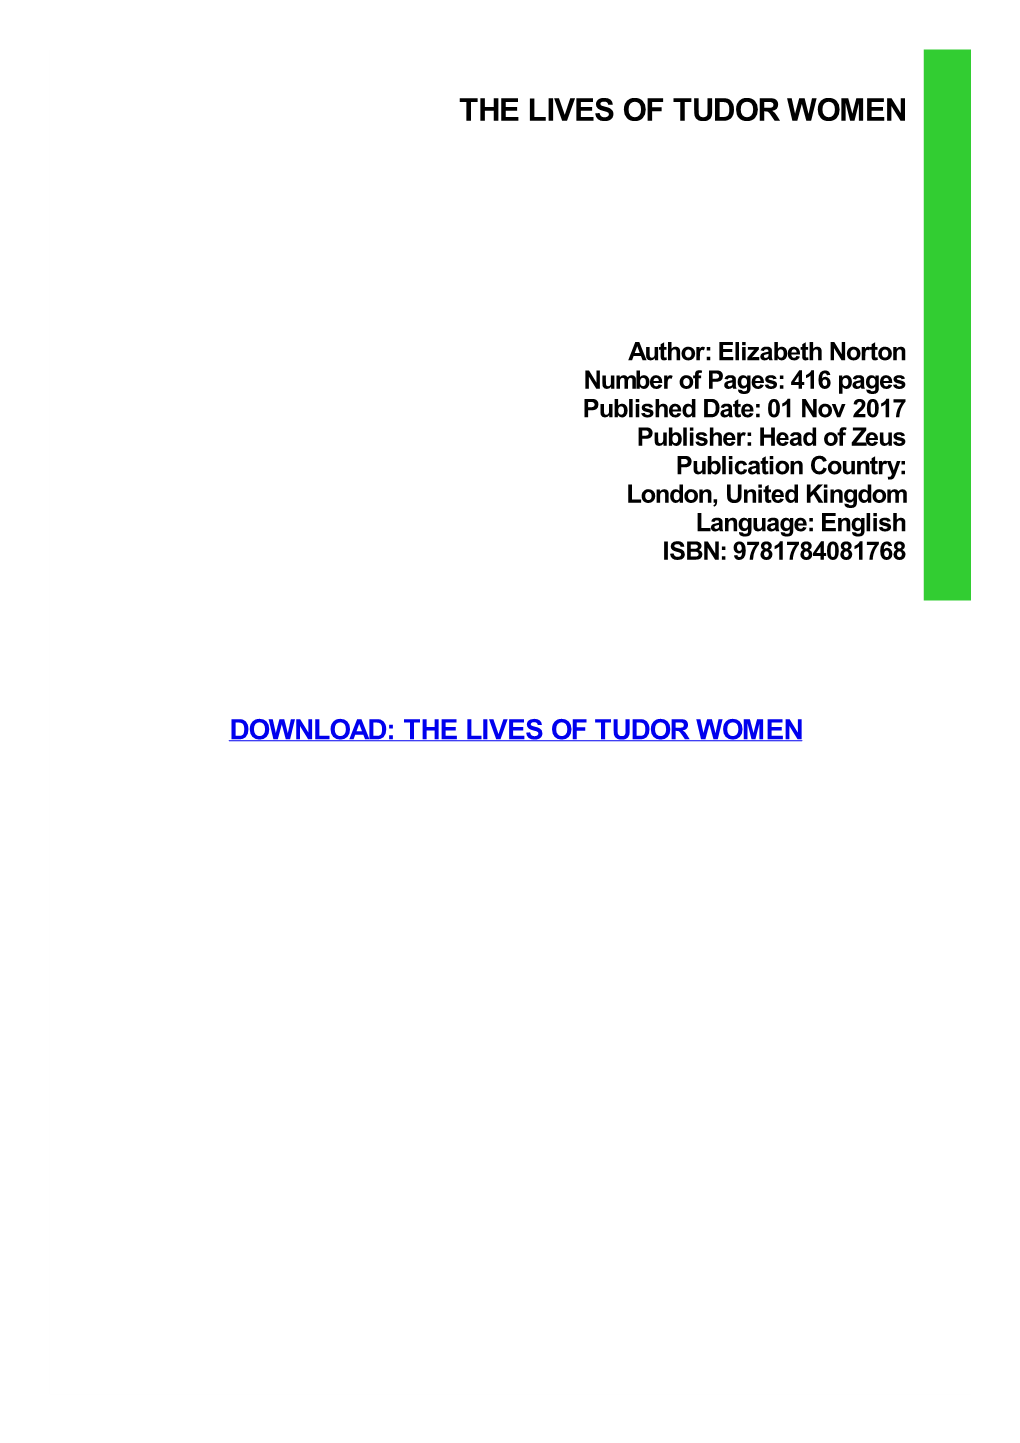 The Lives of Tudor Women Ebook Free Download